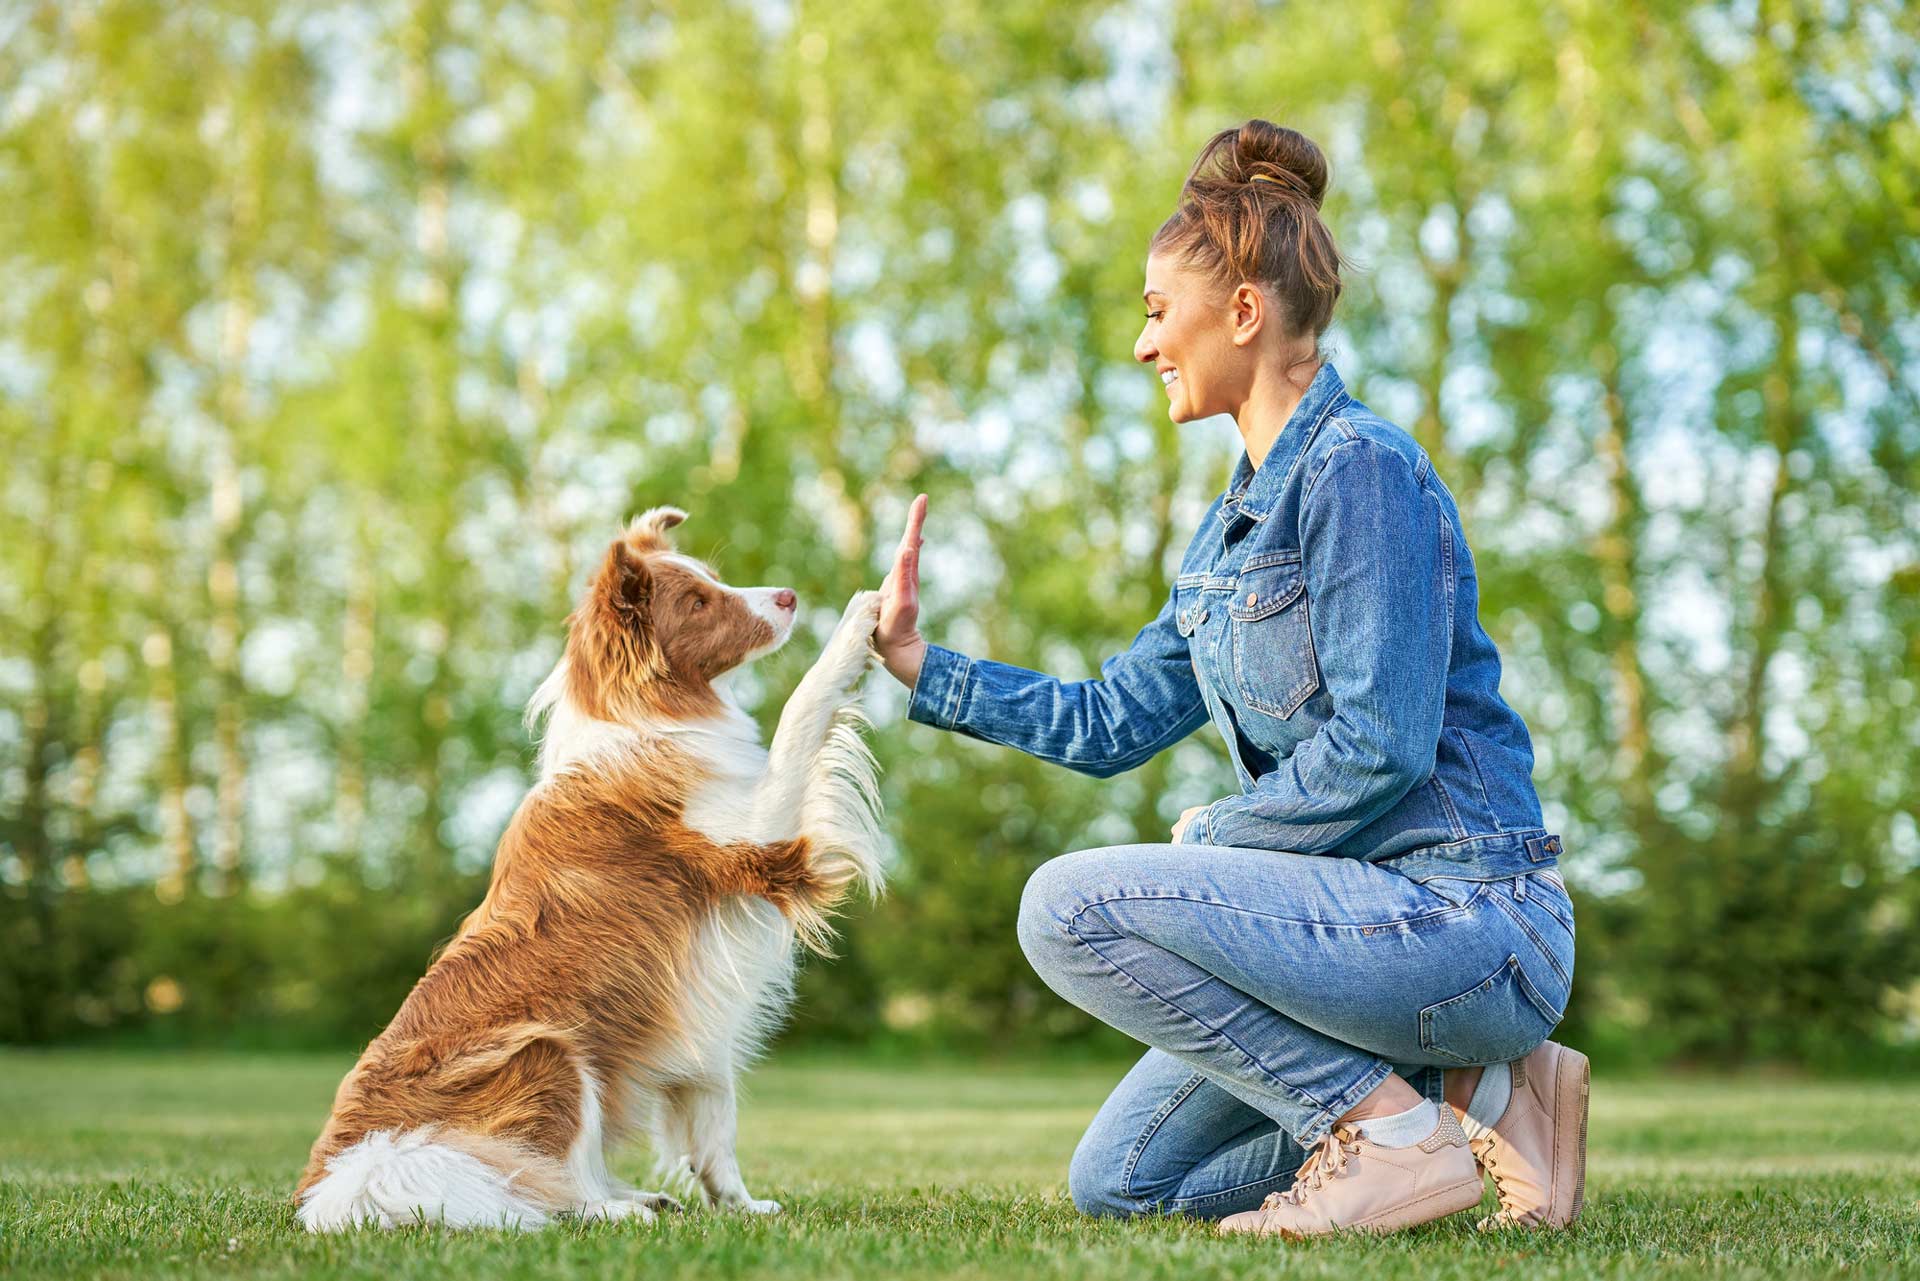 Chocolate White Border Collie with woman owner